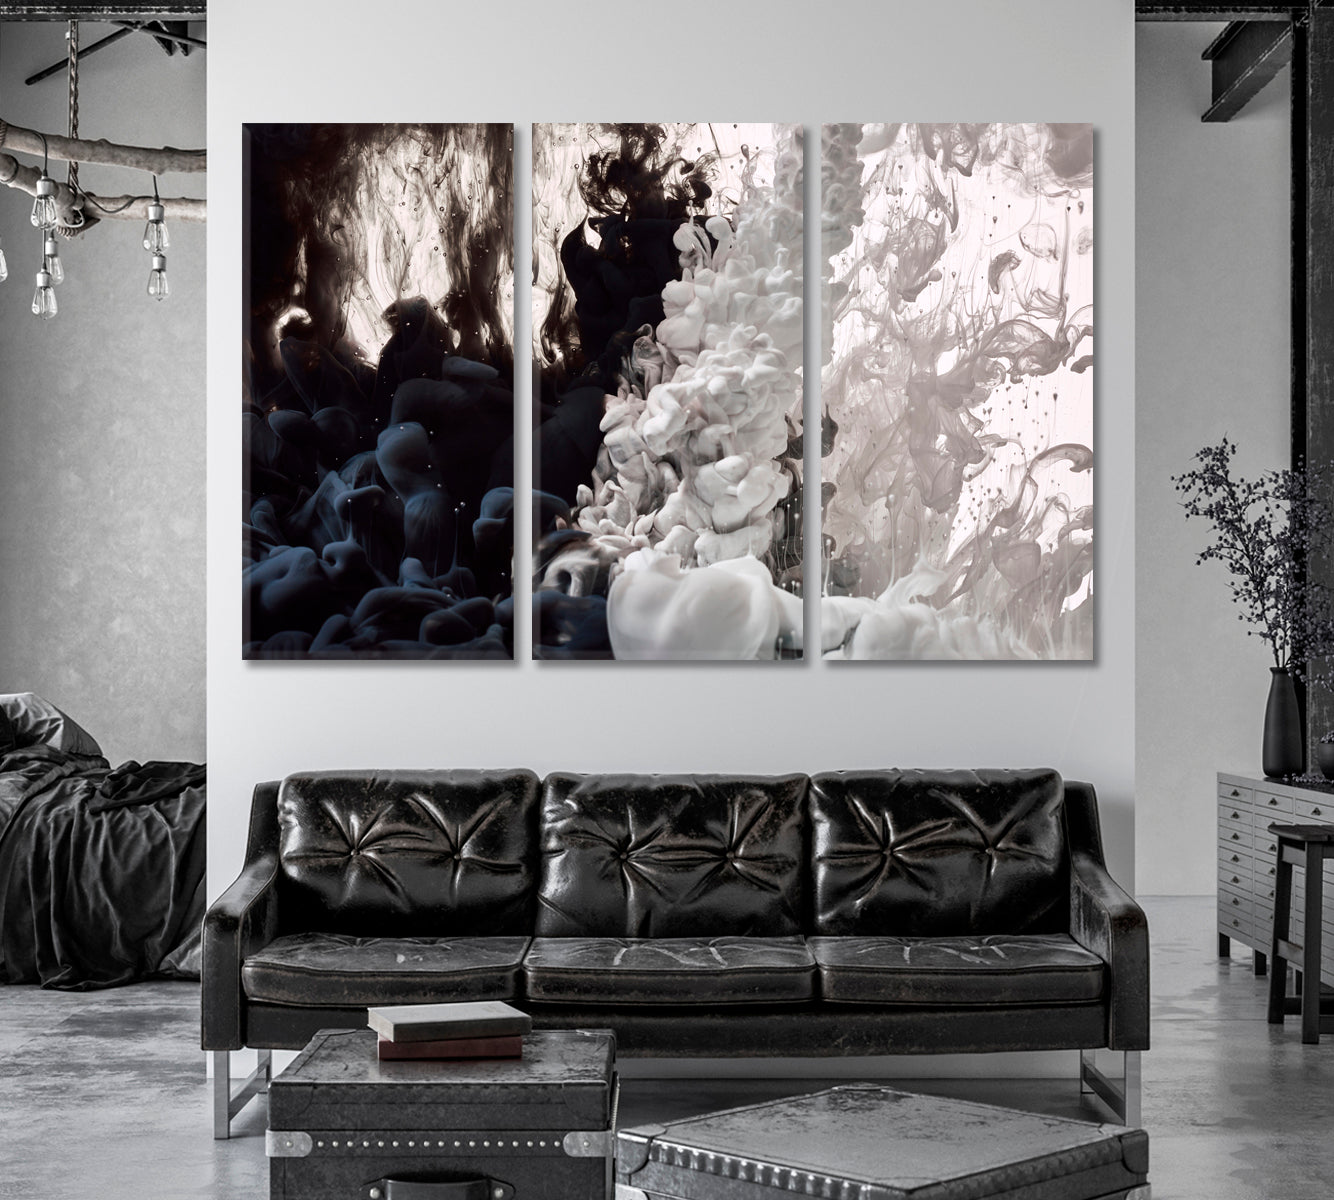 Abstract Black And White Paint Splash in Water Canvas Print-Canvas Print-CetArt-1 Panel-24x16 inches-CetArt